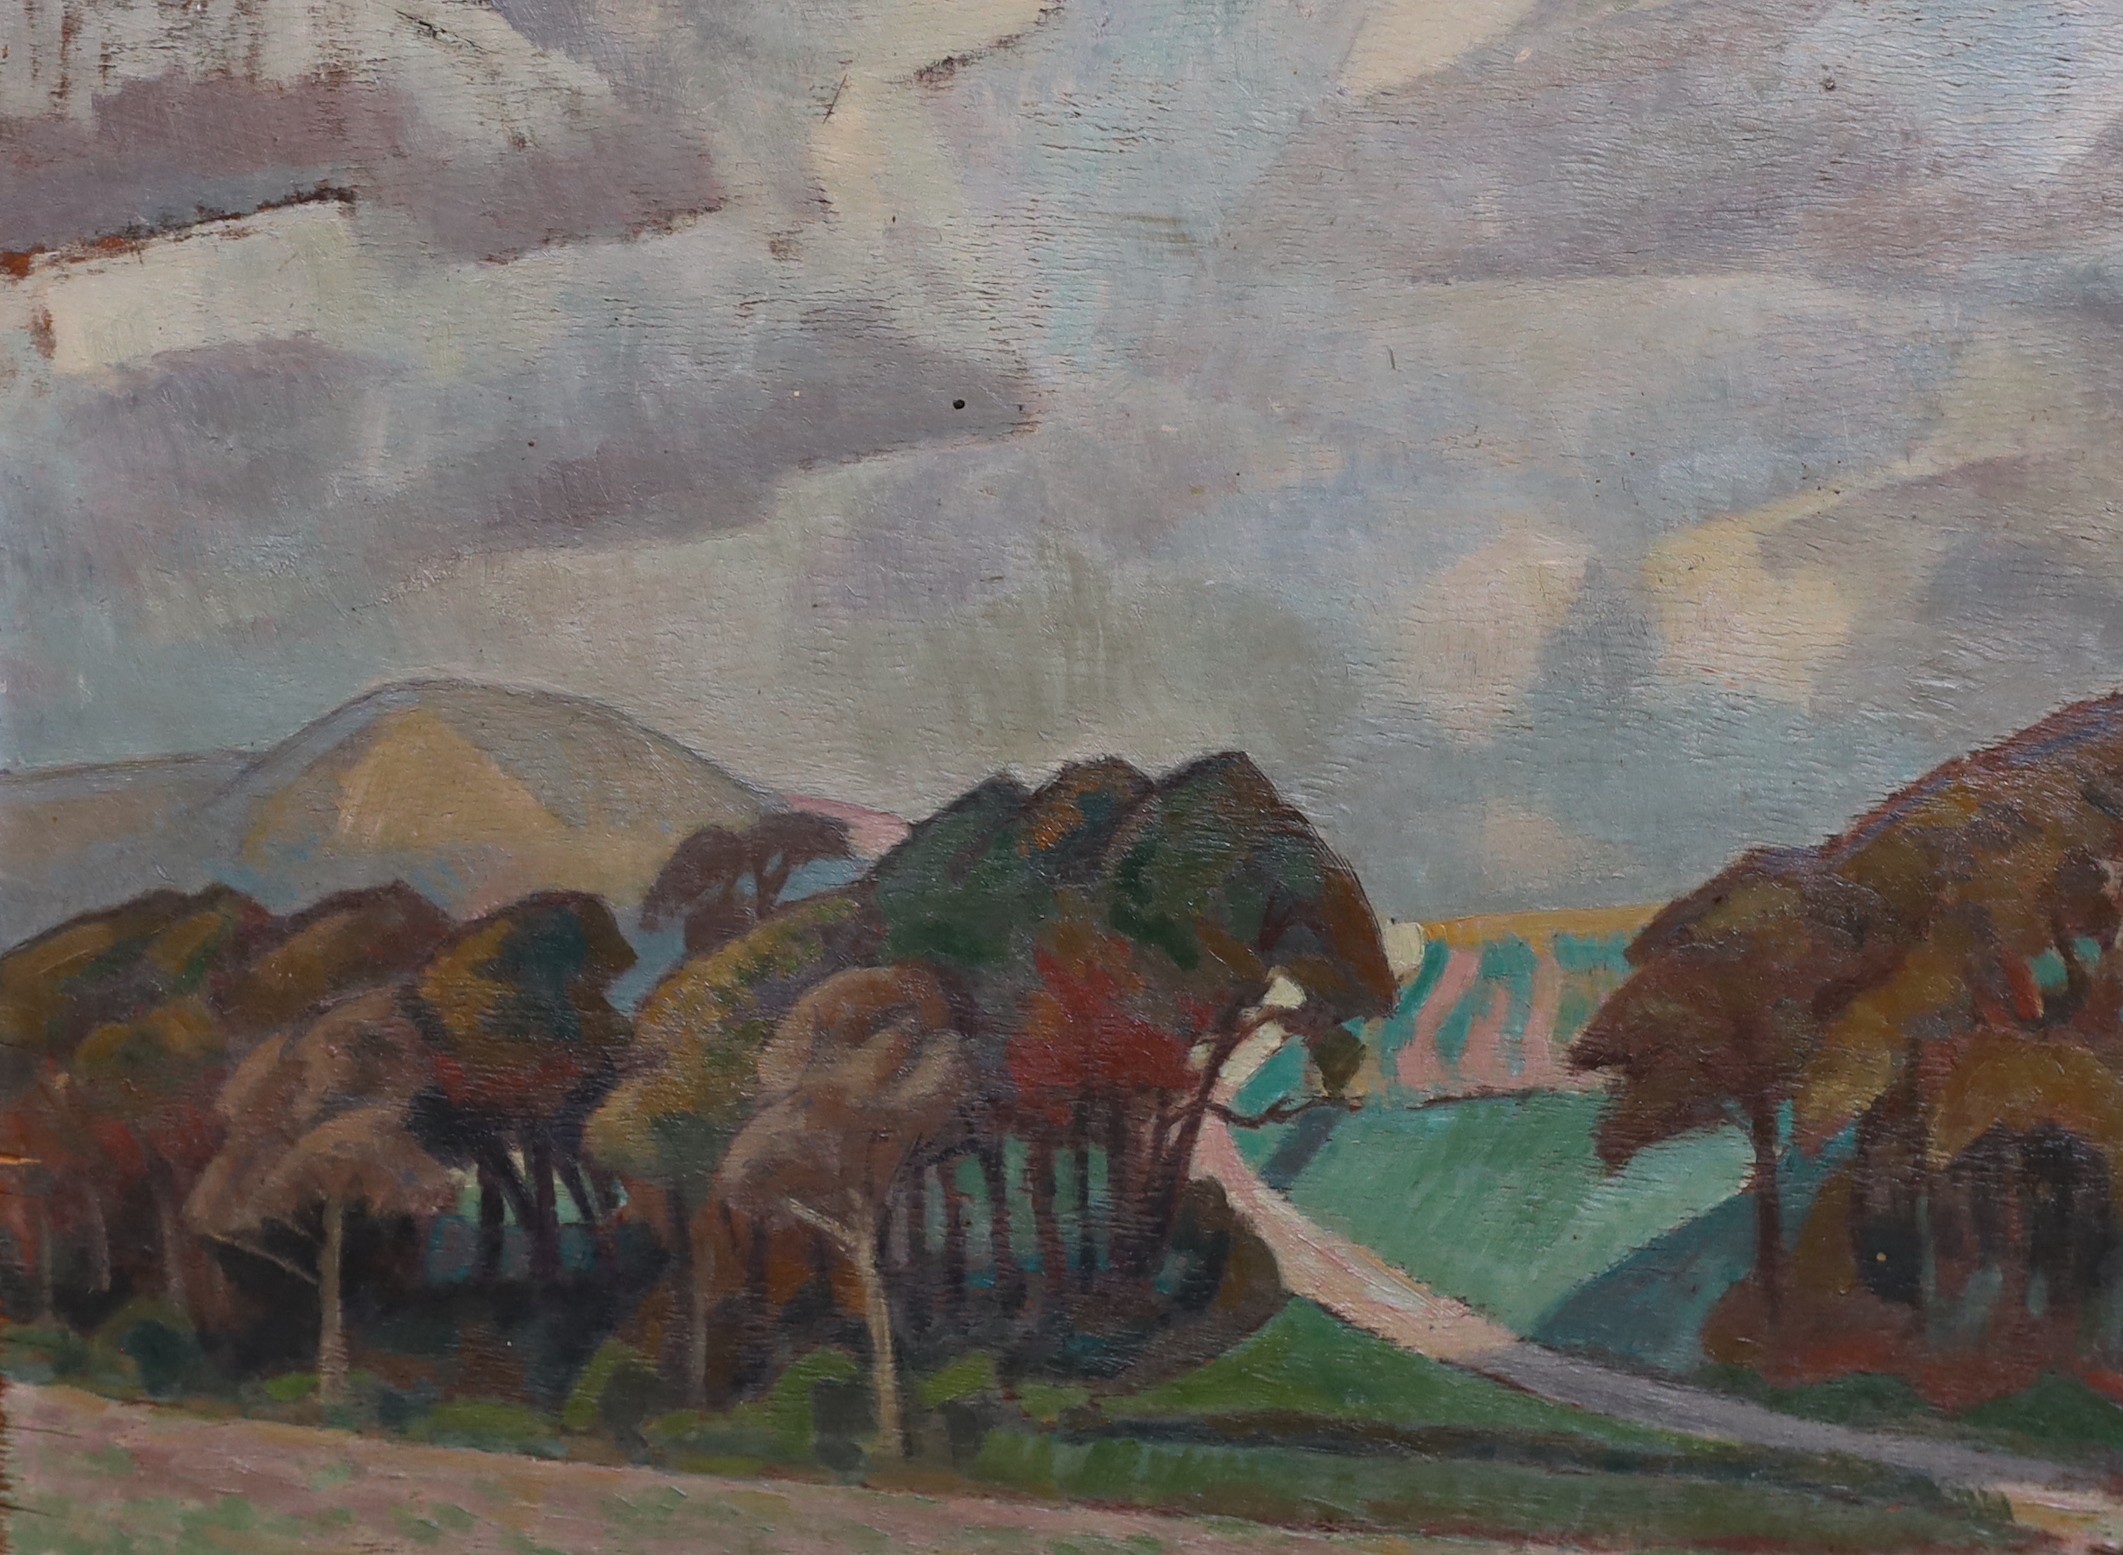 Roger Fry N.E.A.C. (British, 1866-1934), 'The Downs near Guildford', oil on wooden panel, 40 x 52cm